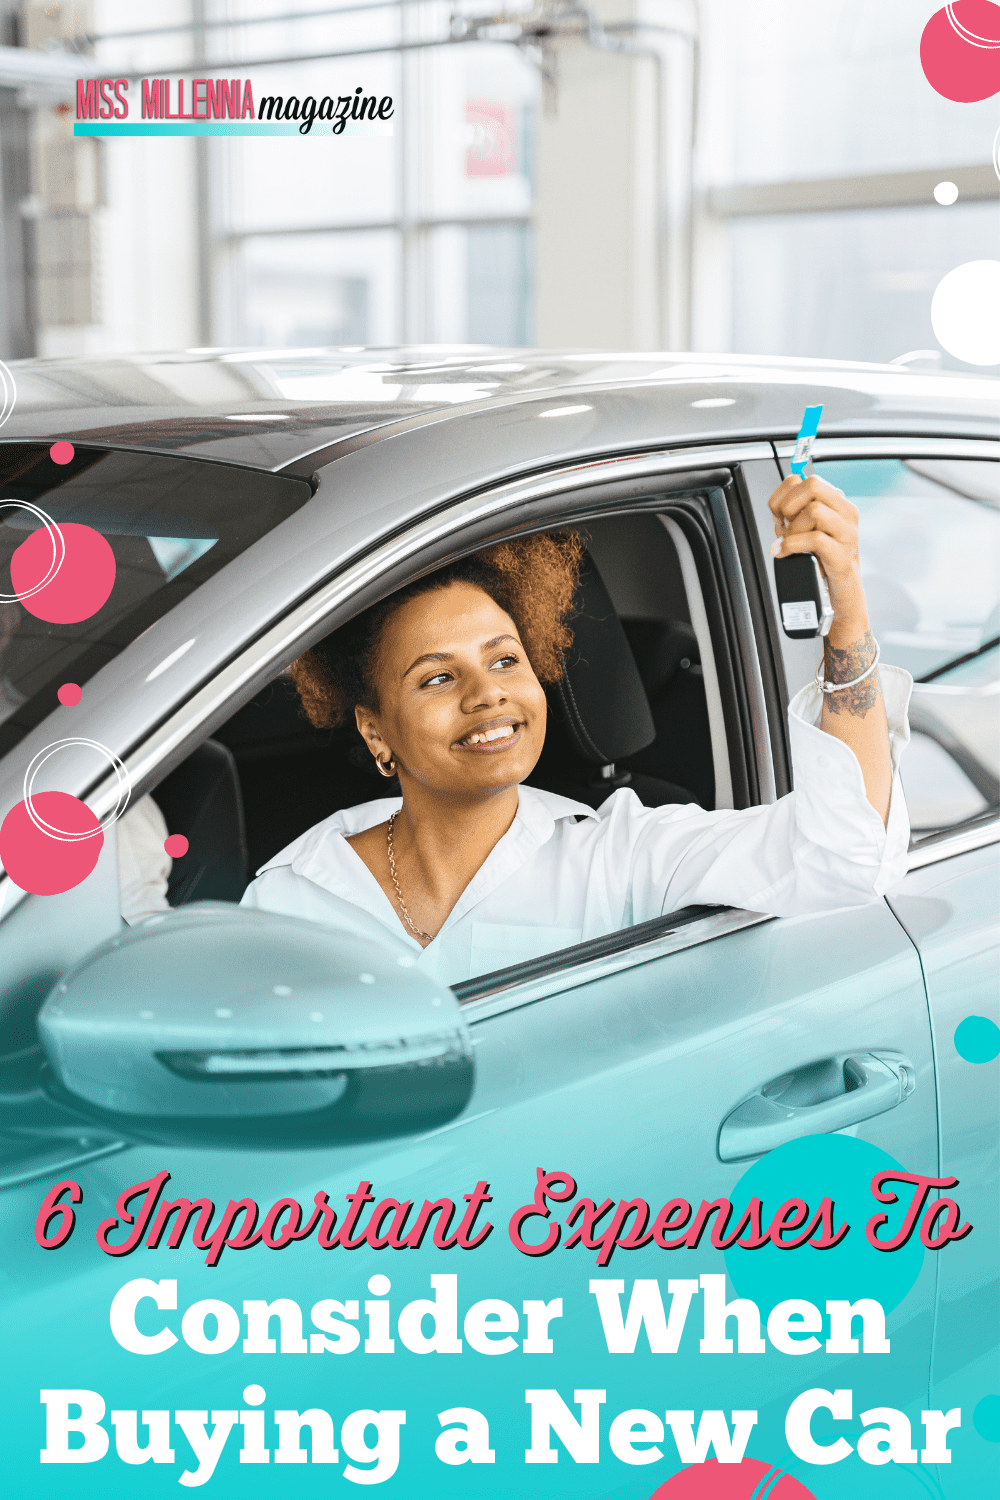 6 Important Expenses To Consider When Buying a New Car